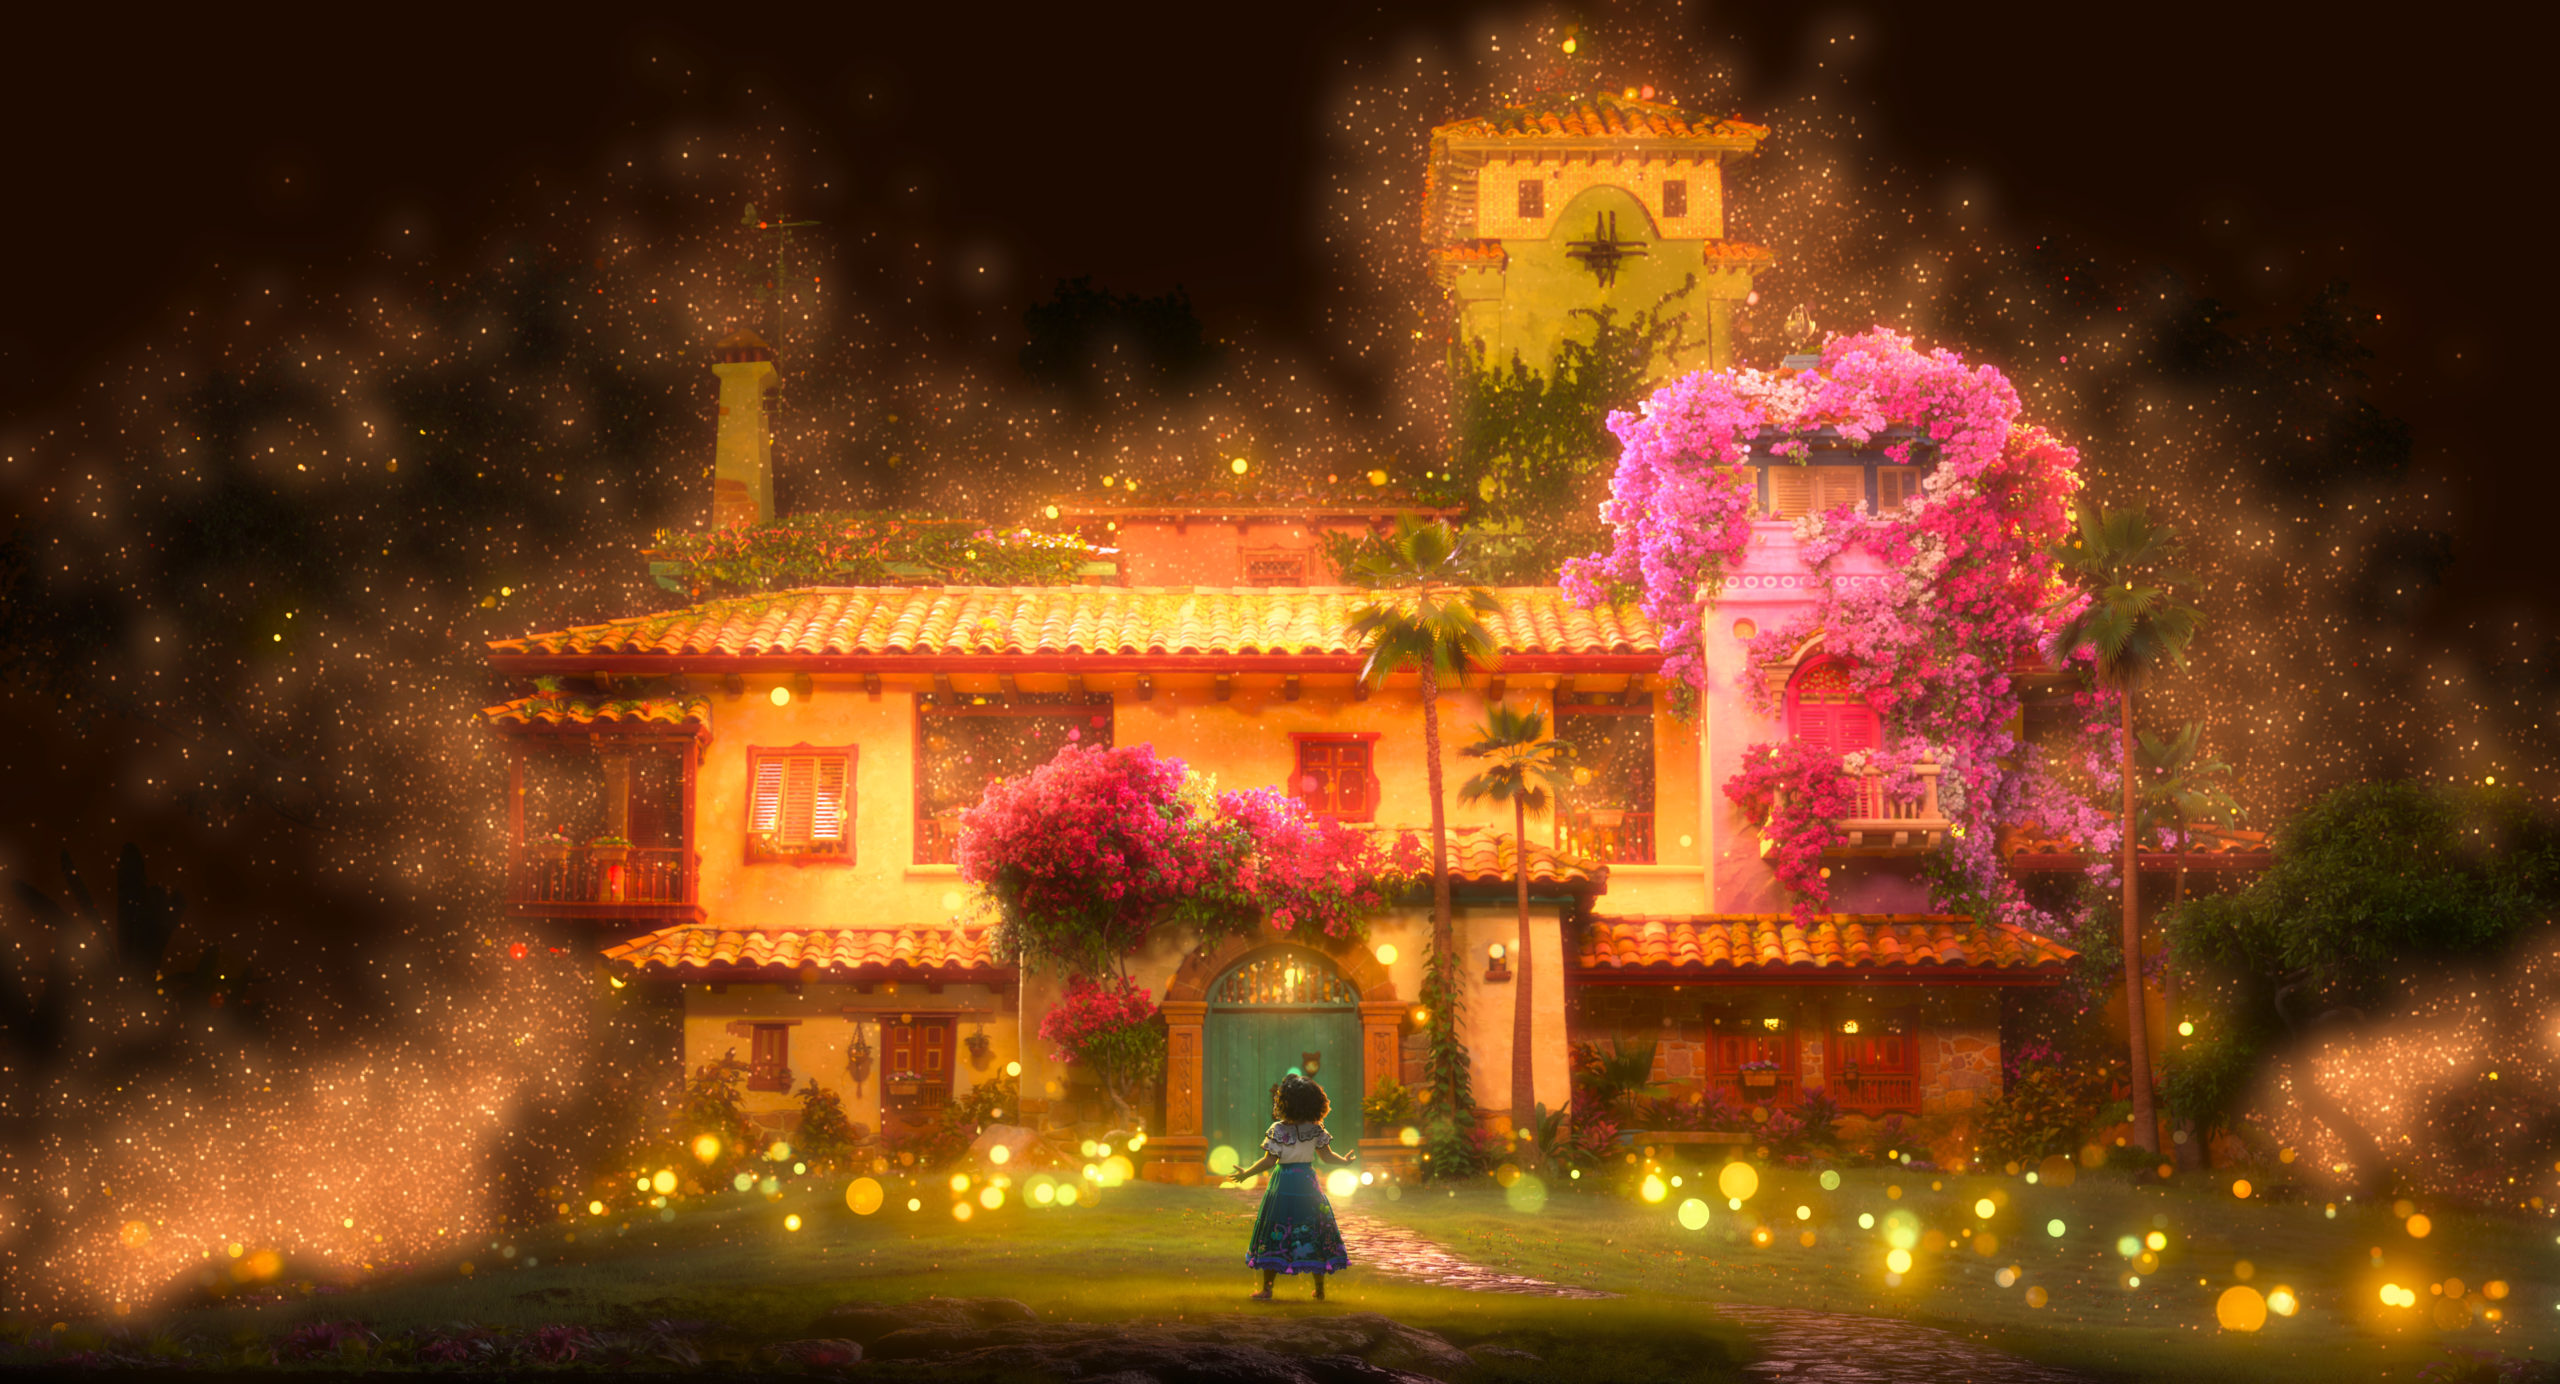 HOME SWEET HOME -- The Madrigal’s casita in “Encanto” is more than a house—it’s alive—embodying the same magic that has blessed the Madrigal children for two generations. Filmmakers liken the house to a loyal pet—it is part of the family. The love for one another is mutual. Opening in the U.S. on Nov. 24, 2021, “Encanto” features songs by Lin-Manuel Miranda. © 2021 Disney. All Rights Reserved.